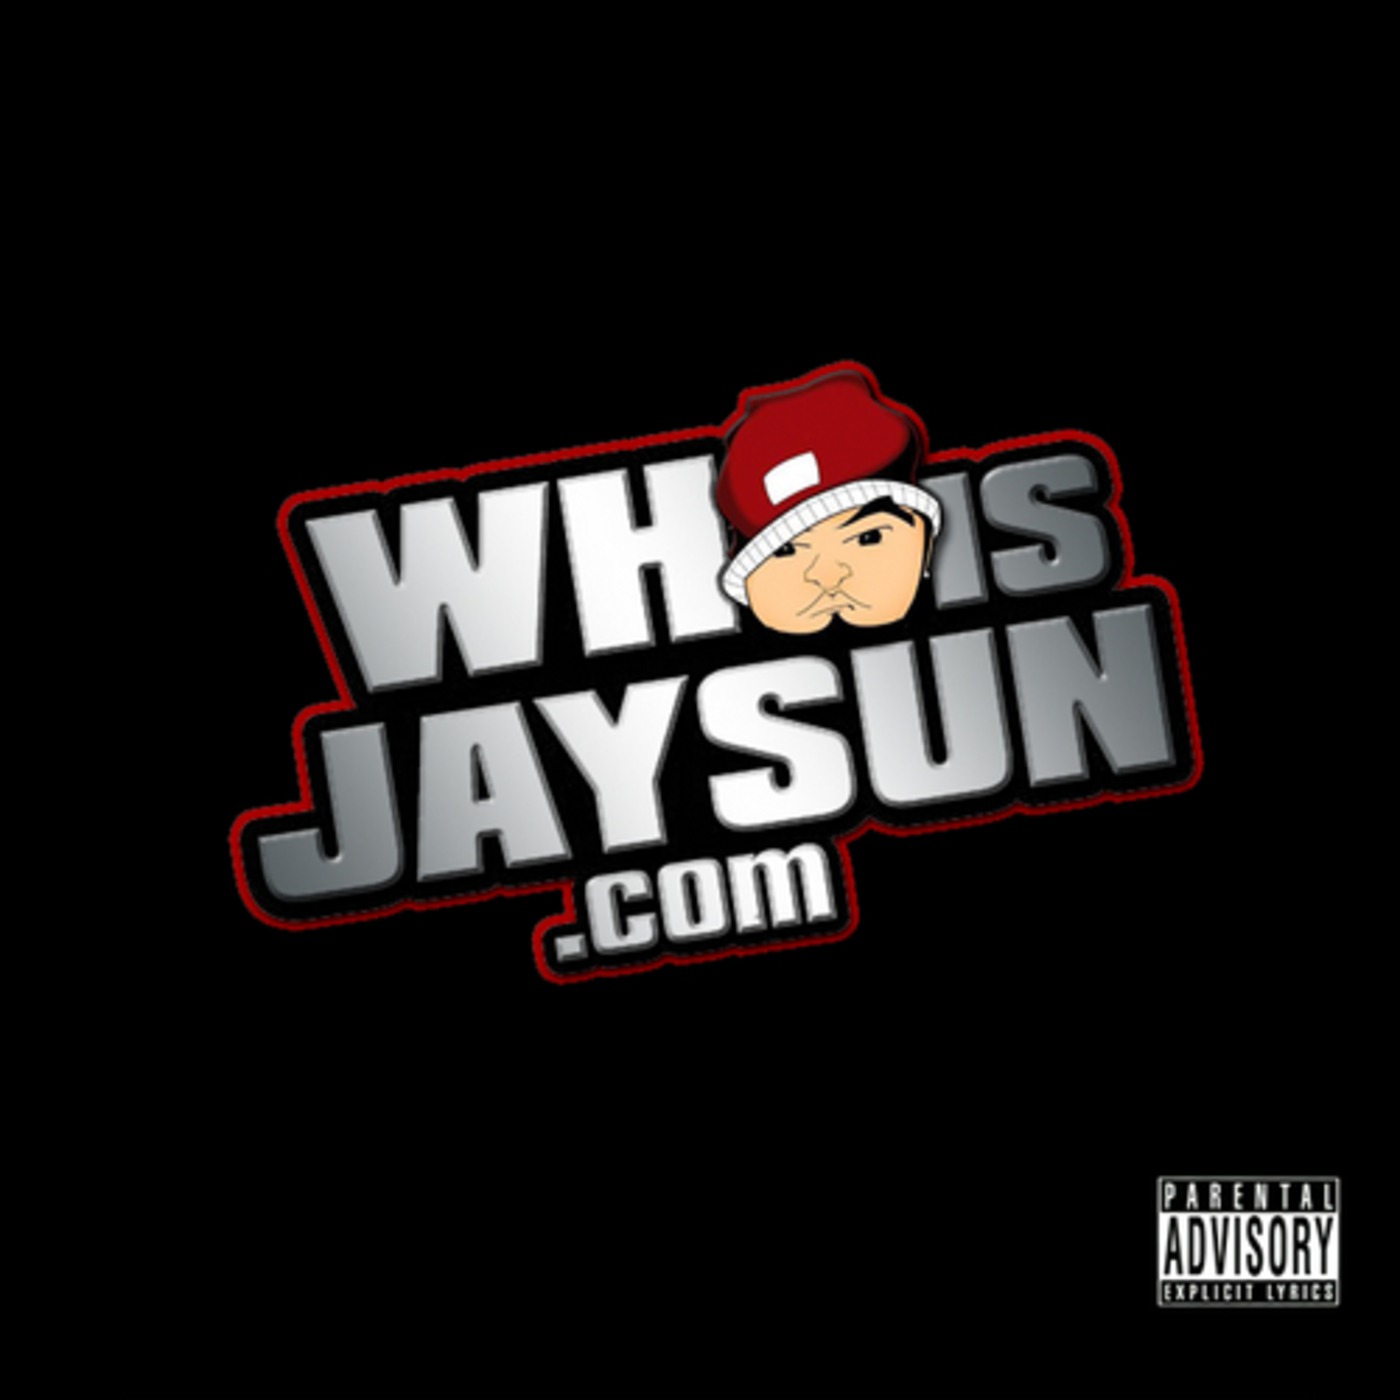 Down With Me by Jaysun